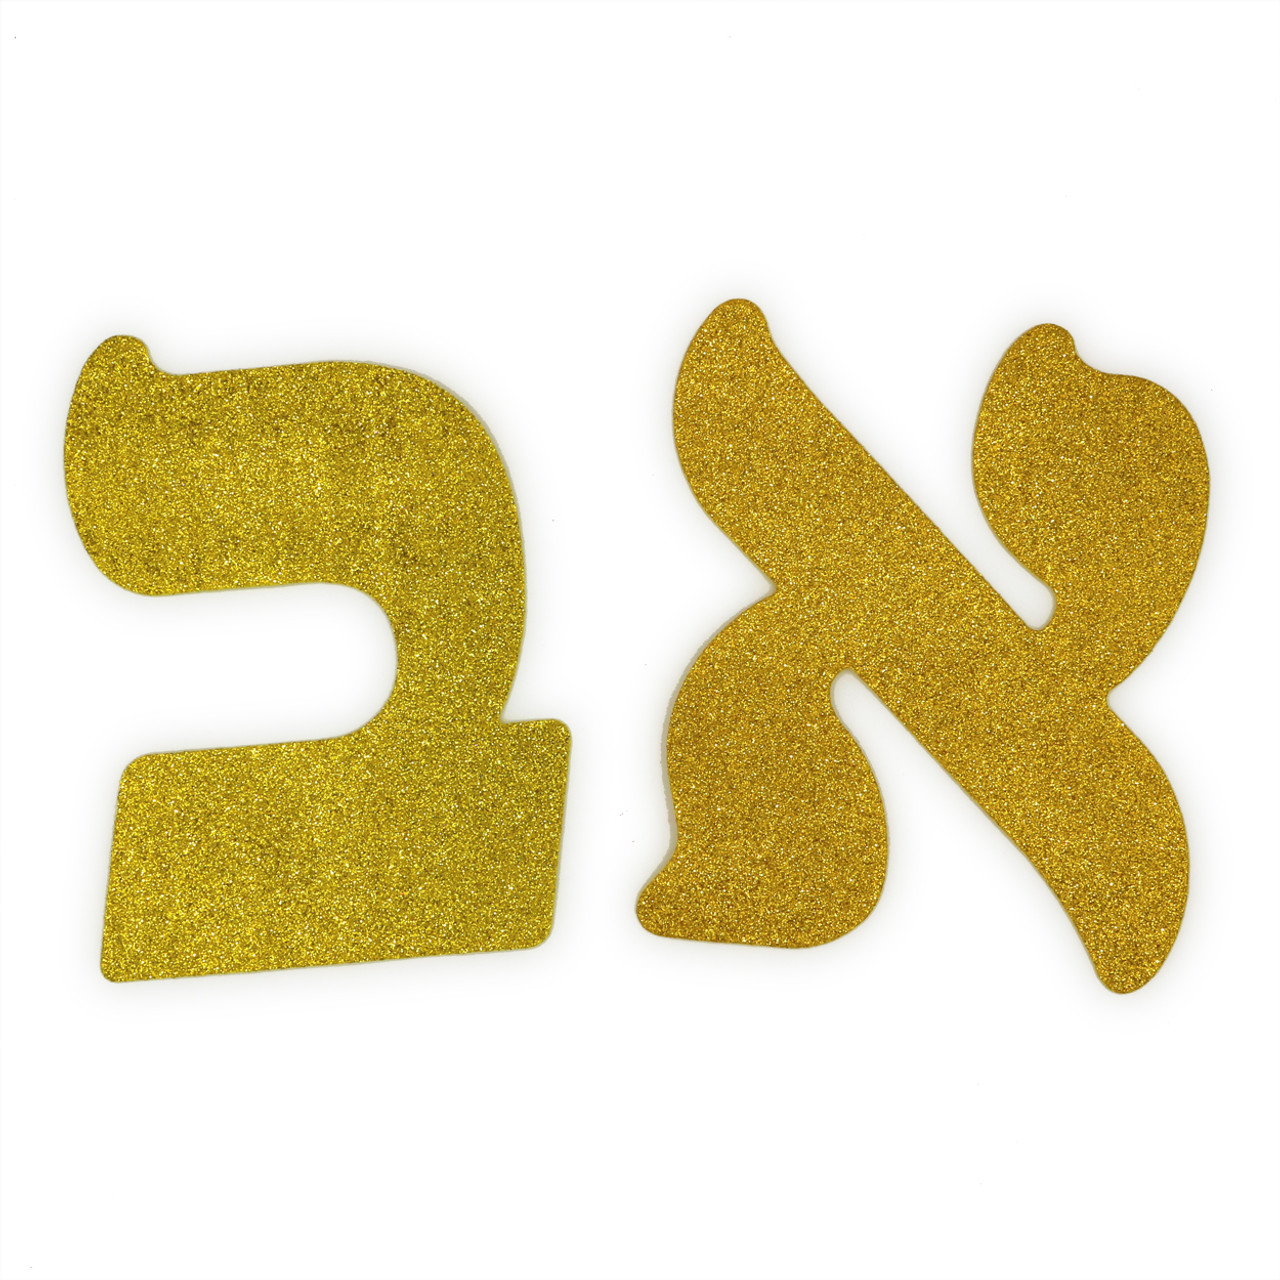 Alef Bet Foam Letters  at the Jewish School Supply Company